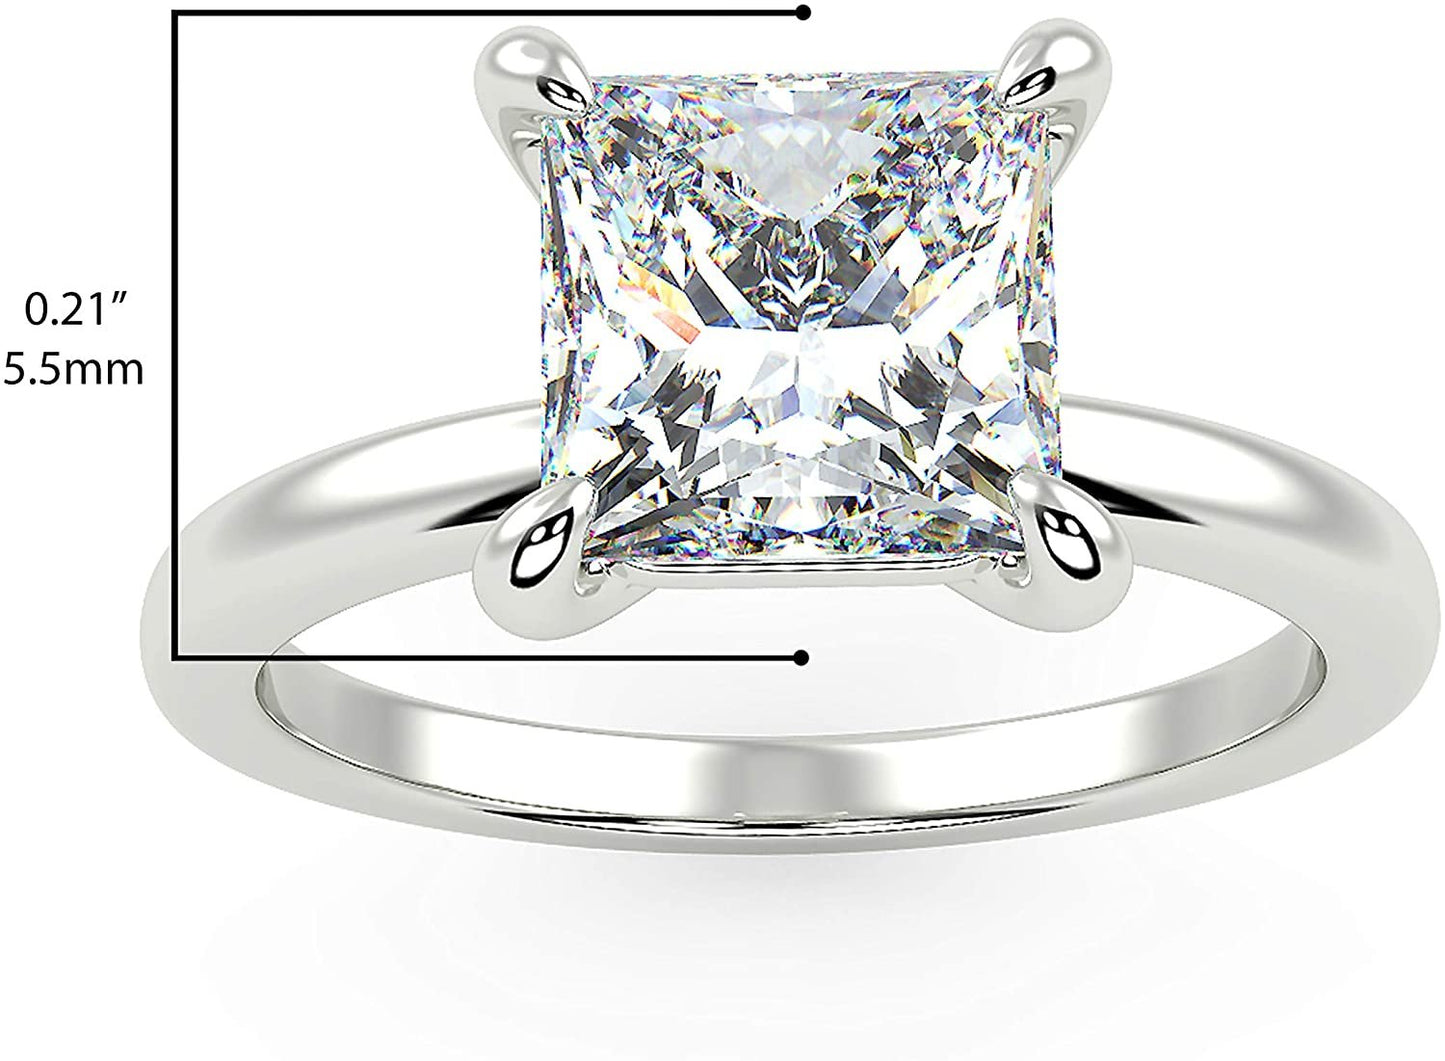 IGI Certified 14K White Gold 1.0 Carat Princess-Cut Lab Created Diamond Classic Square Solitaire Engagement Ring (G-H Color, VS1-VS2 Clarity) - Size 8.5